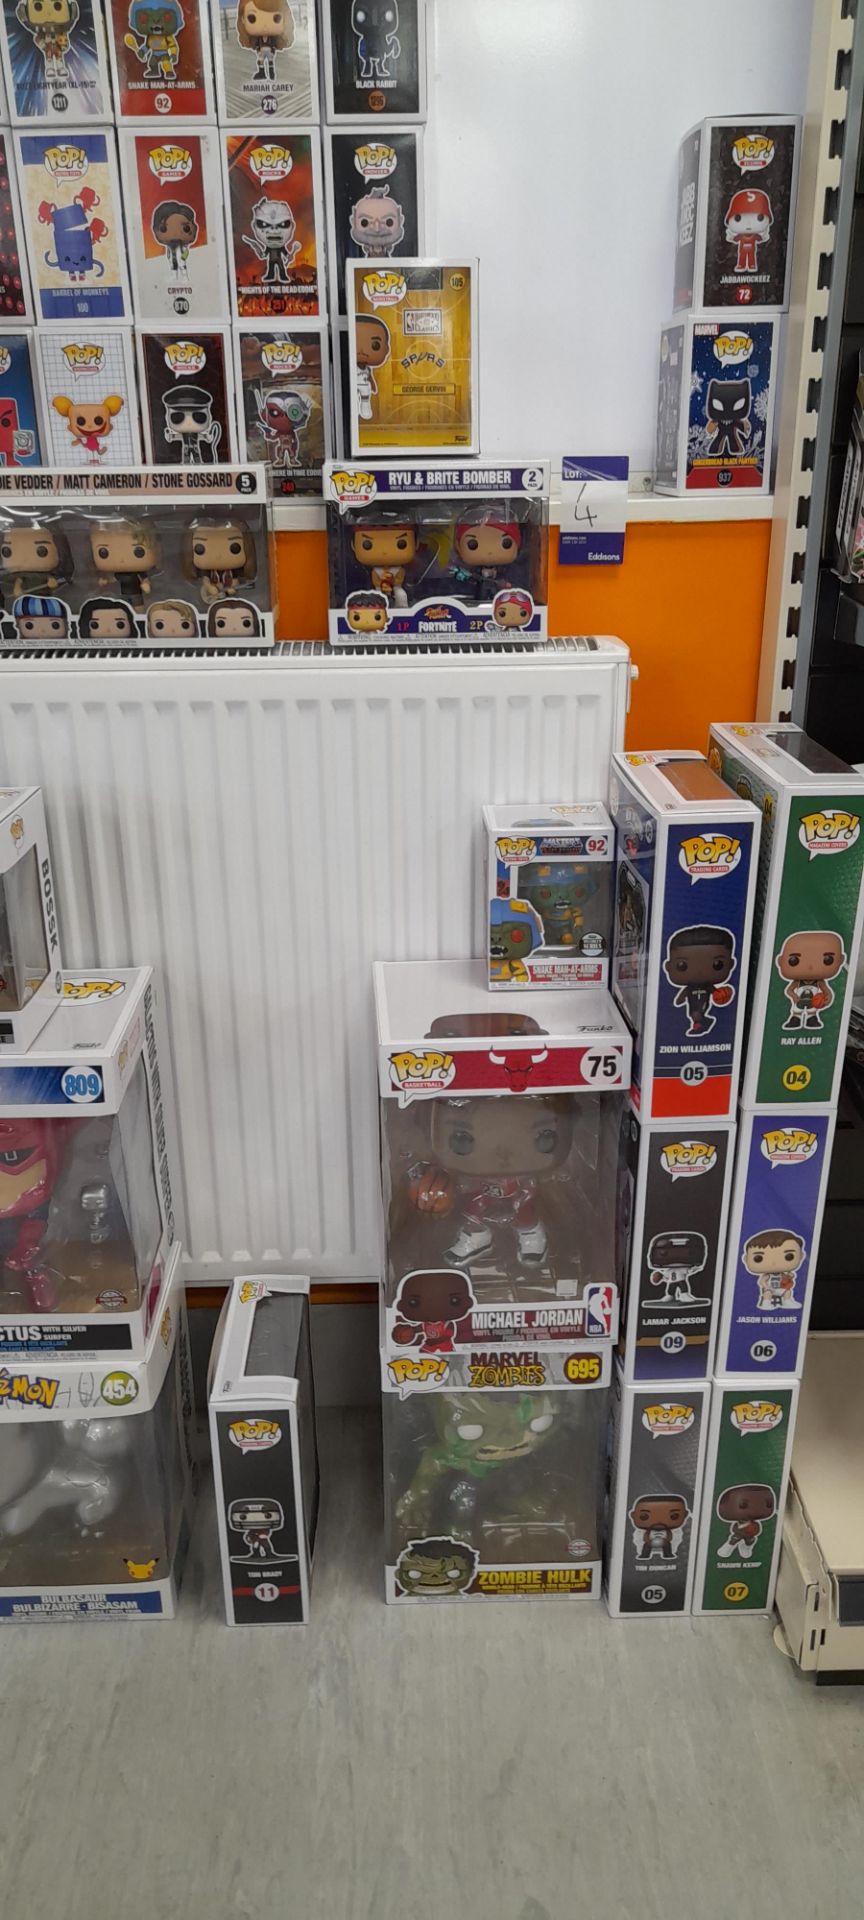 Quantity of Funko POP Collectables (Star Wars, Marvel, Heroes, TV etc.) to floor and wall - Bild 5 aus 8